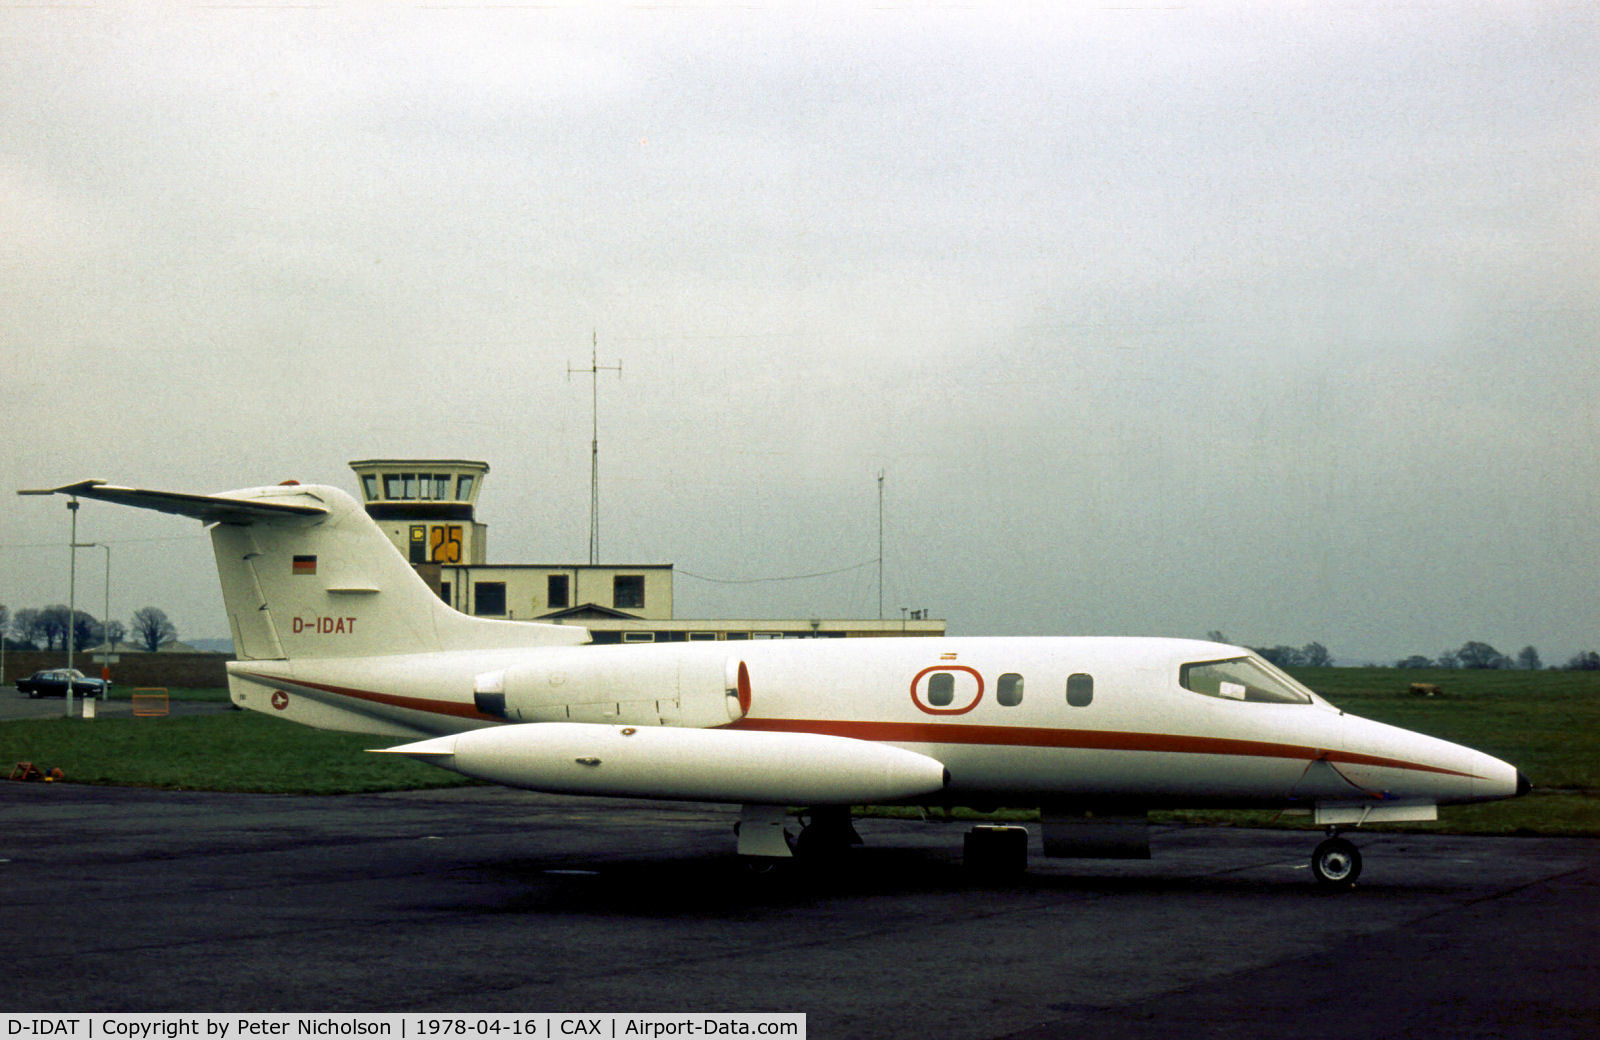 D-IDAT, 1973 Learjet 24D C/N 24-261, Learjet 24D visitor to Carlisle in the Spring of 1978.